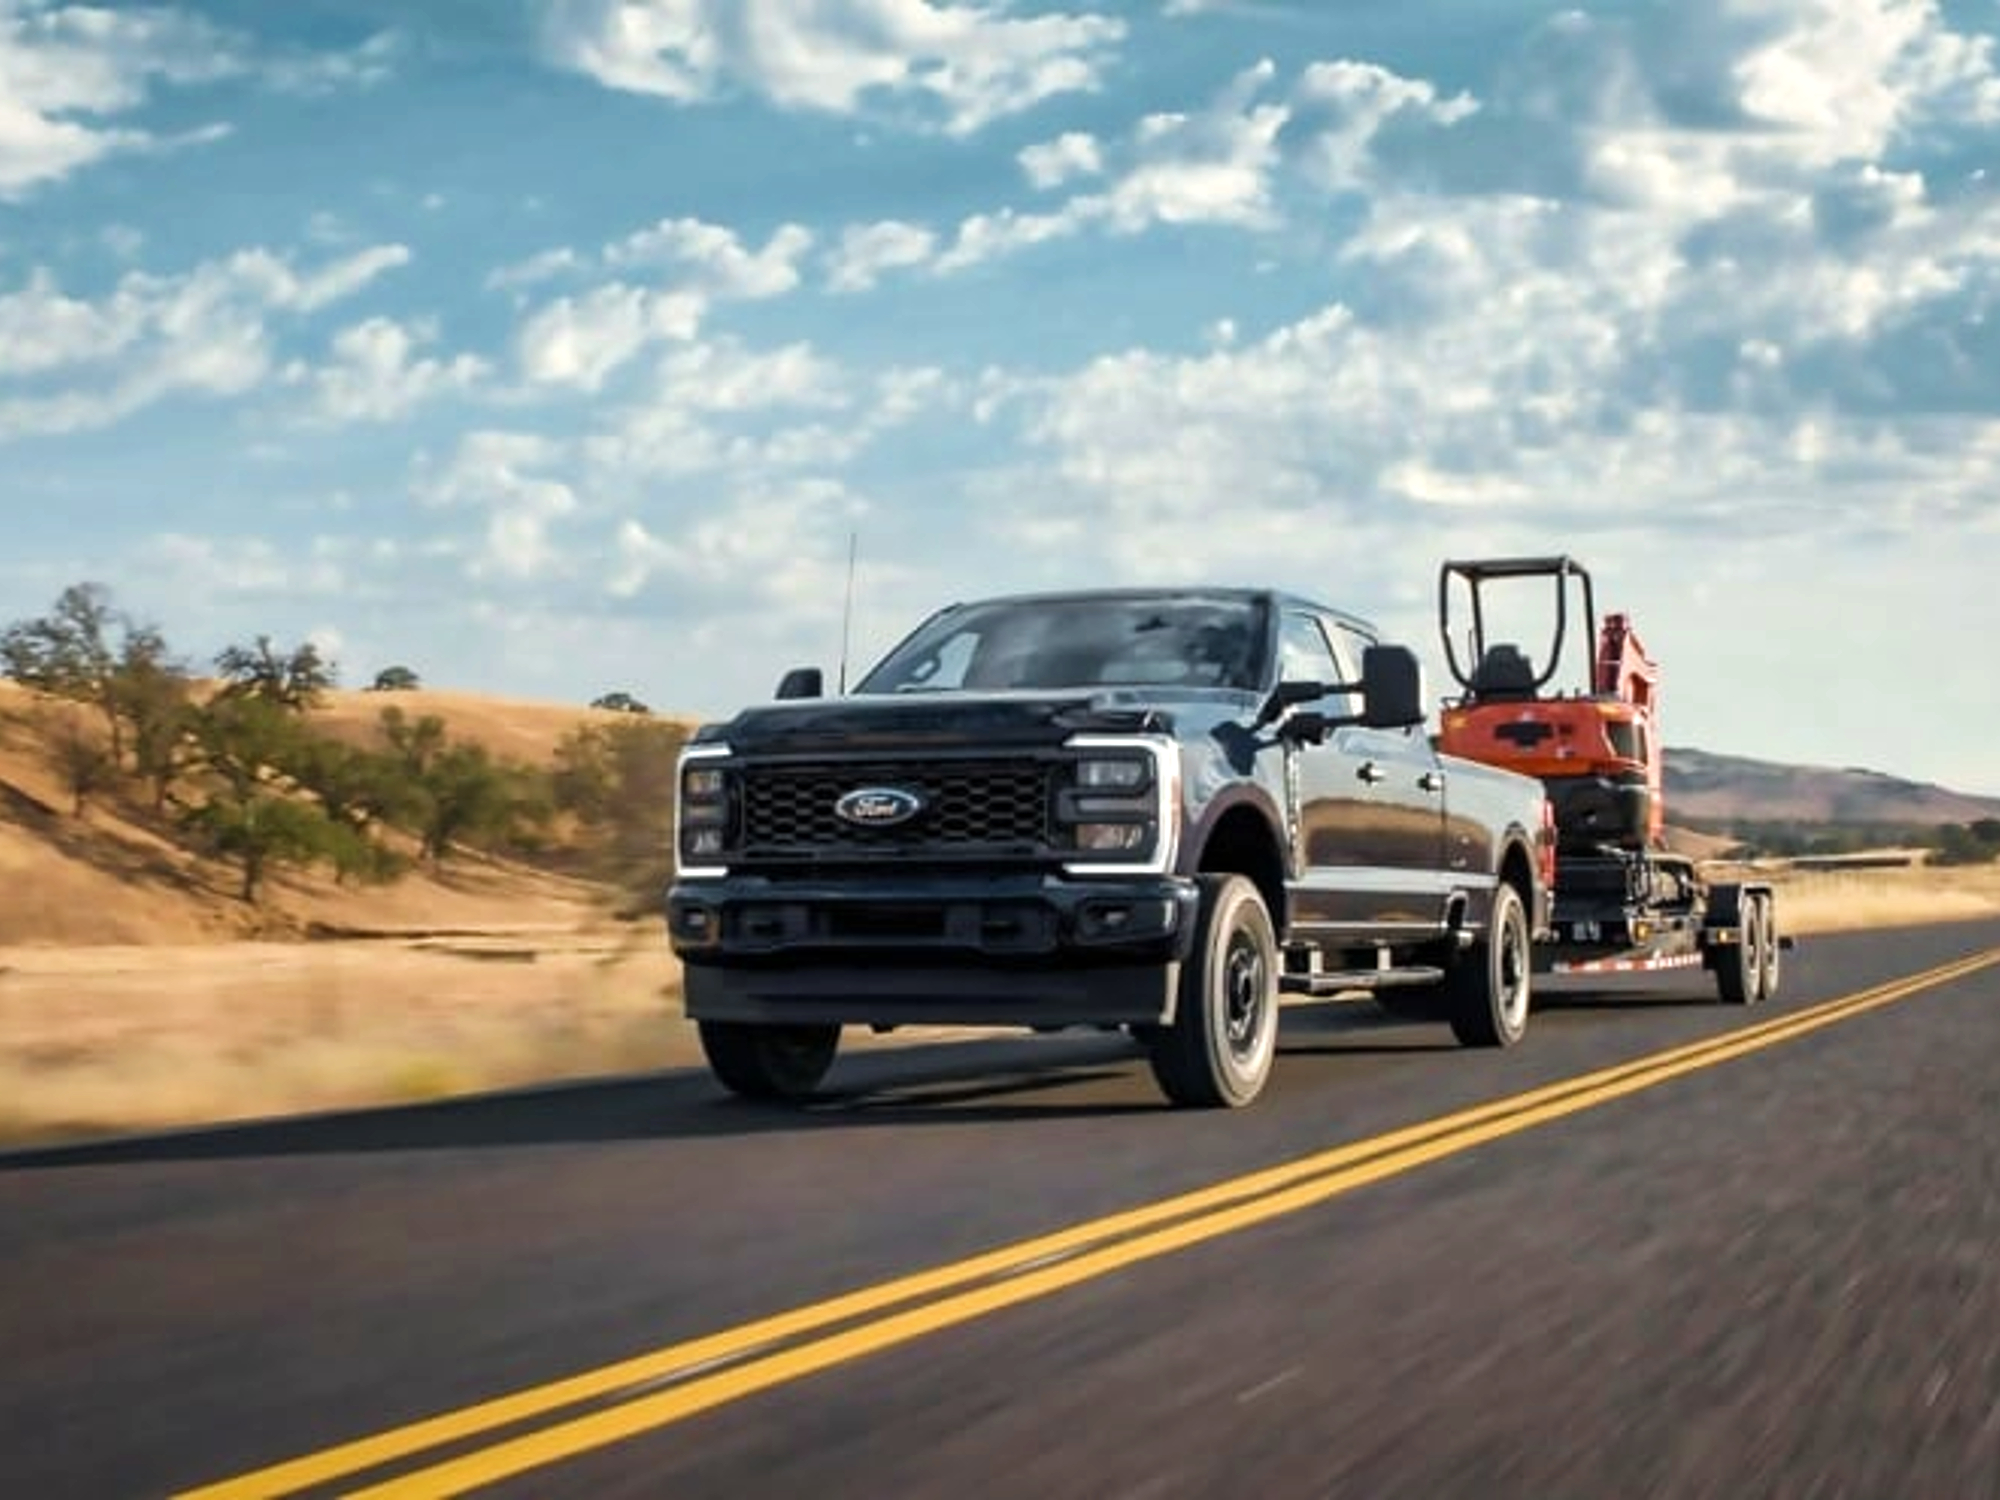 Ford F Series SuperDuty pickup truck towing a trailer carrying a piece of construction equipment on a highway.